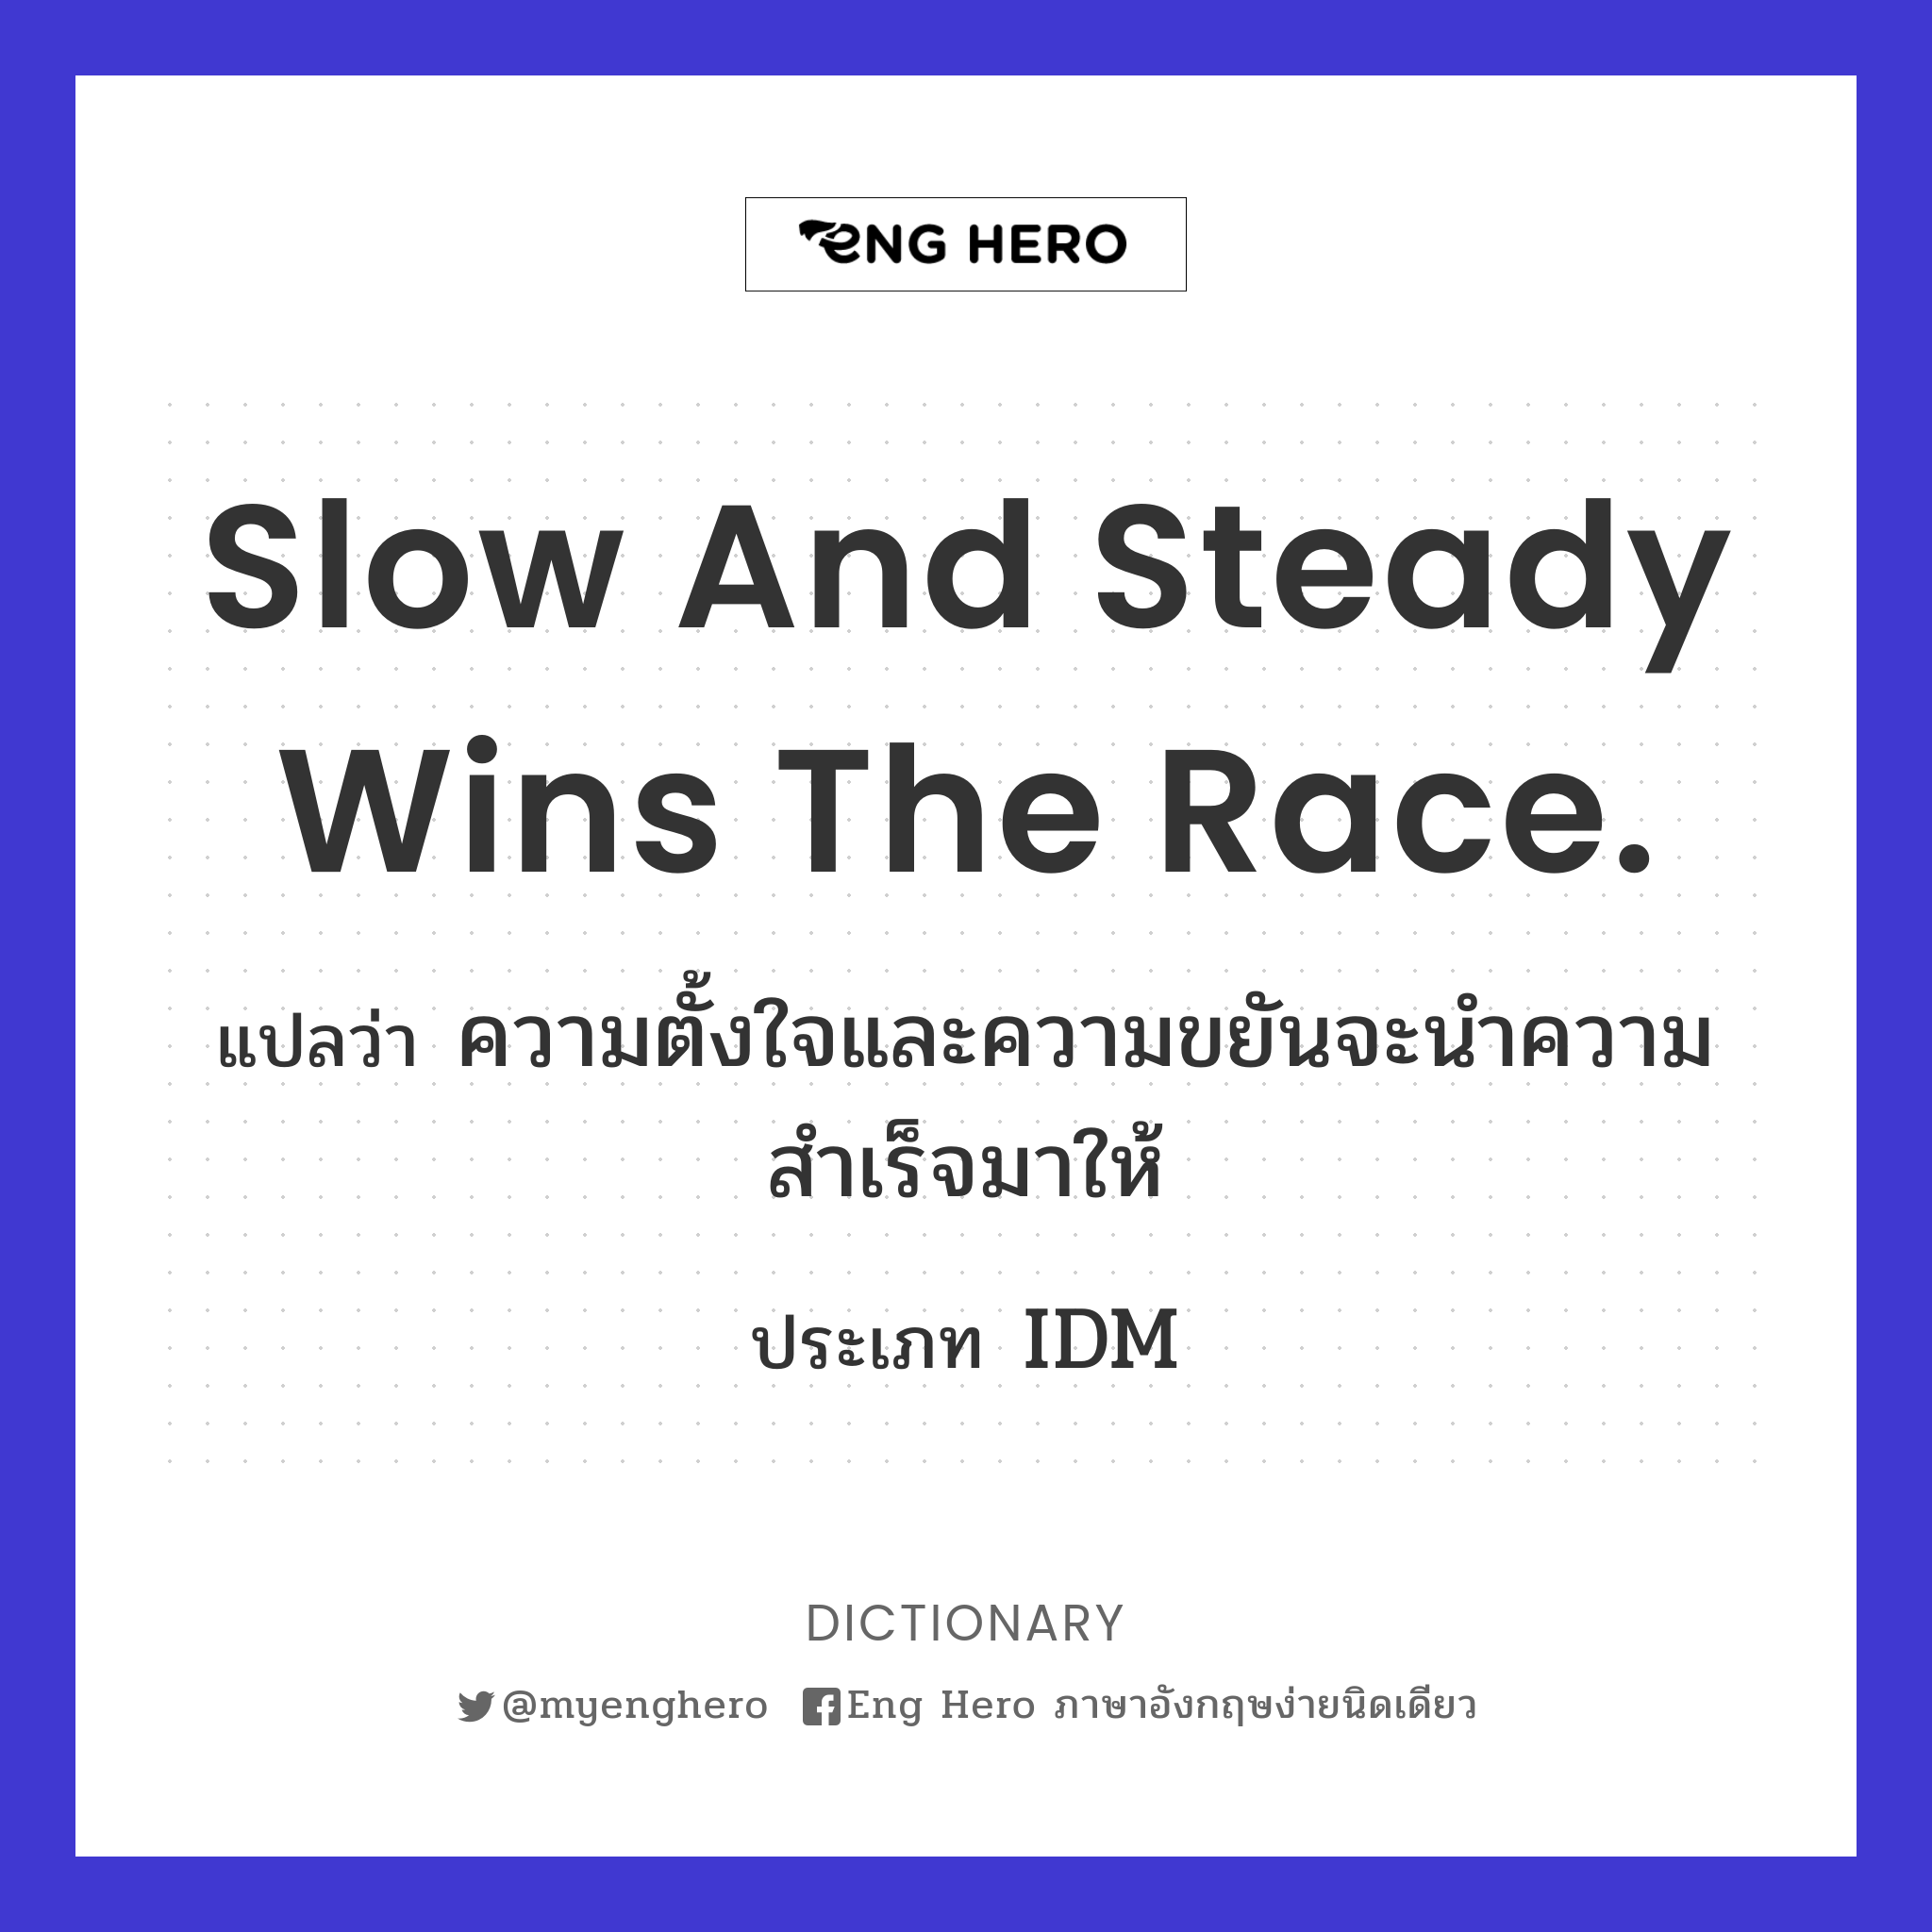 Slow and steady wins the race.